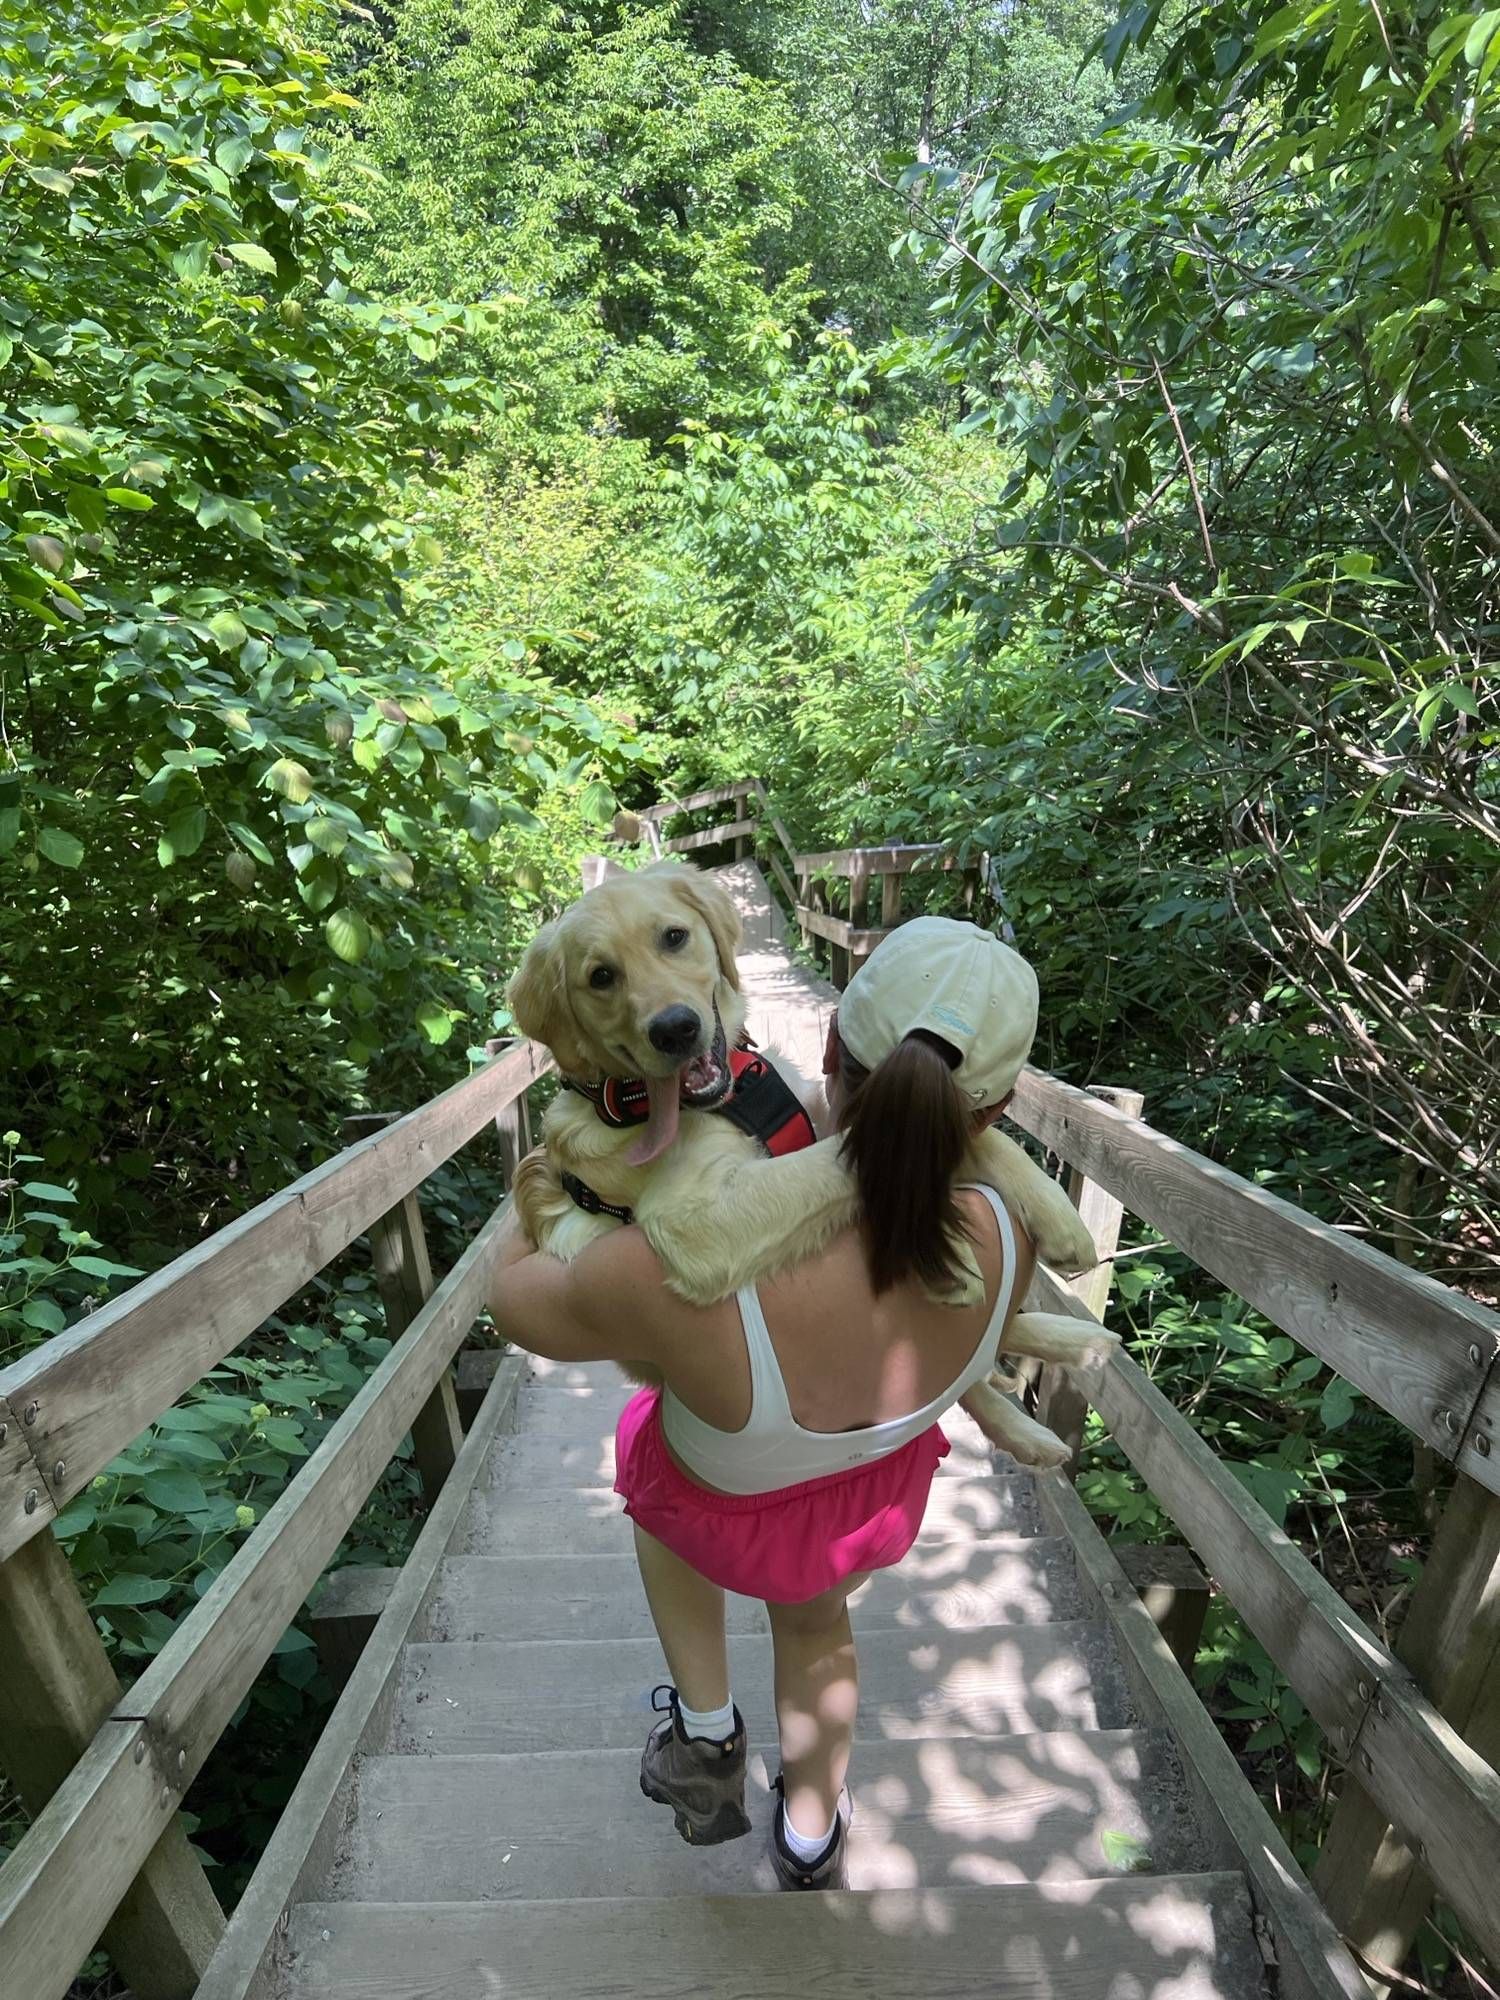 Hikes are easy, especially when mom does the hard parts